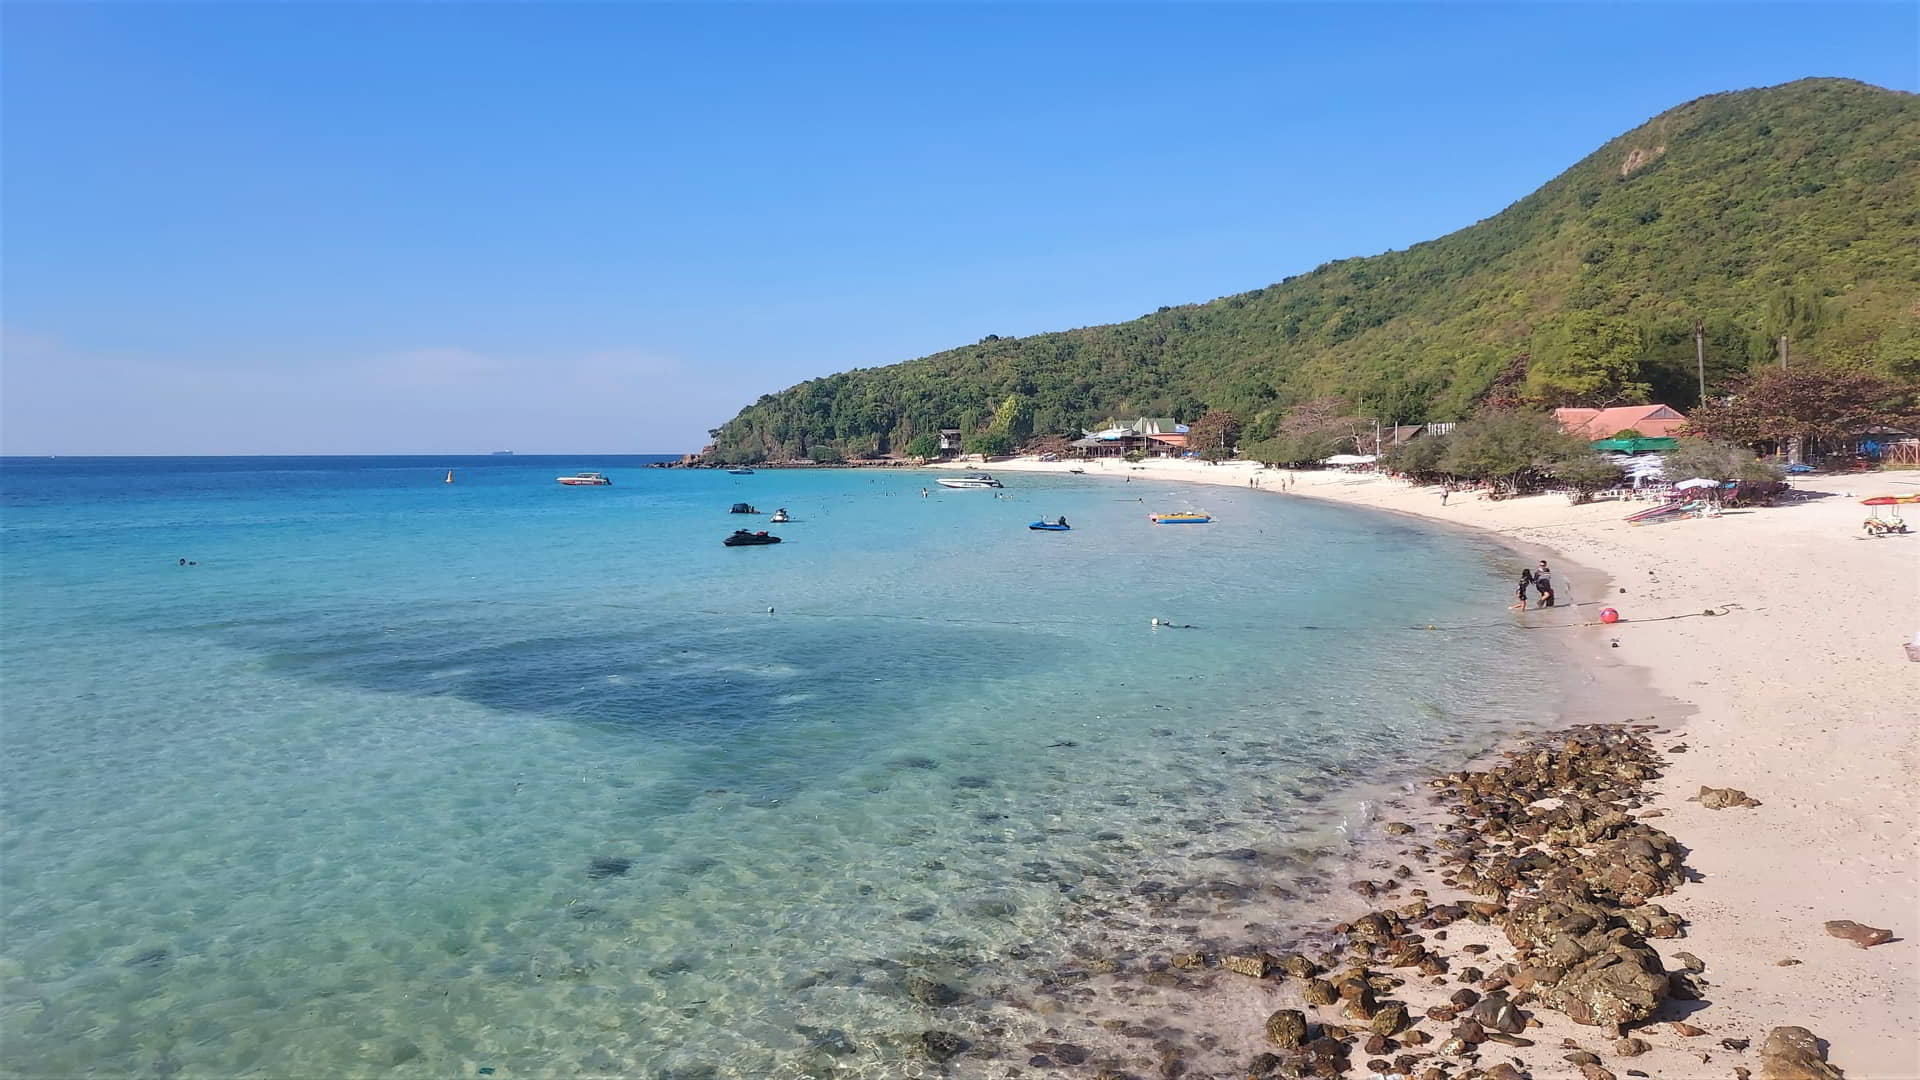 Koh Larn Travel Guide: Essential Tips and Information